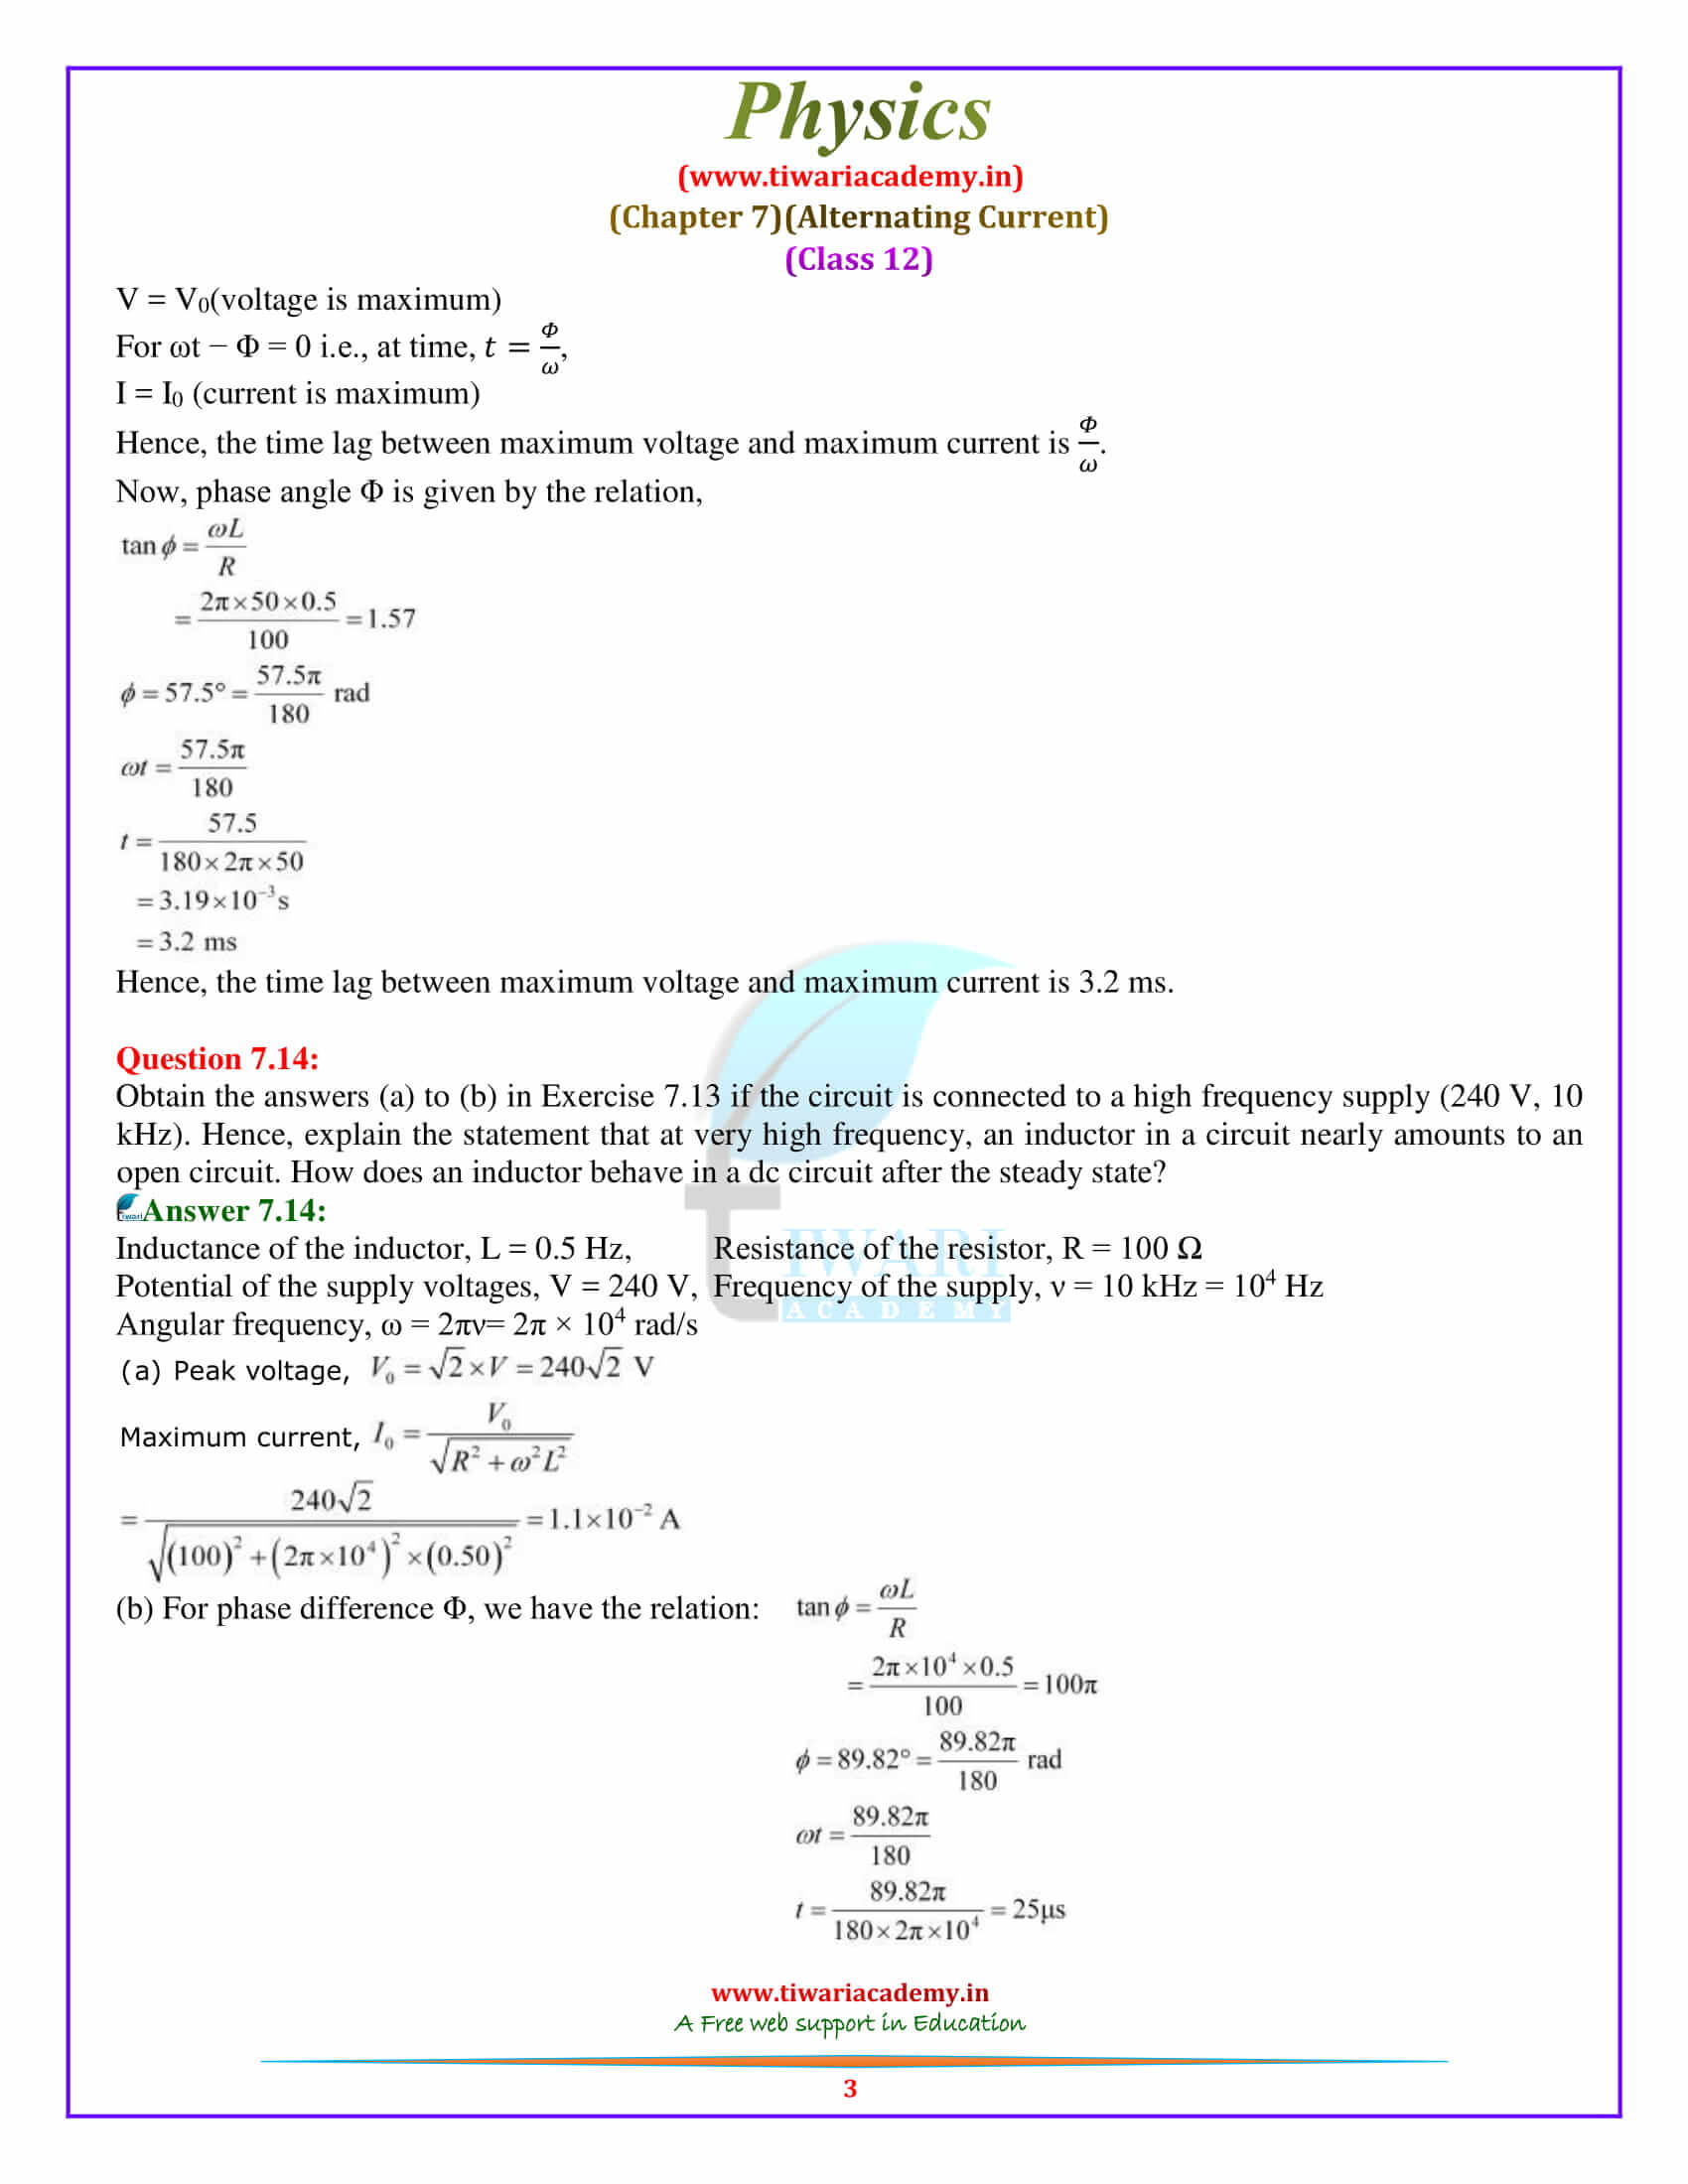 12 Physics Chapter 7 Alternating Current additional exercises solutions in pdf free